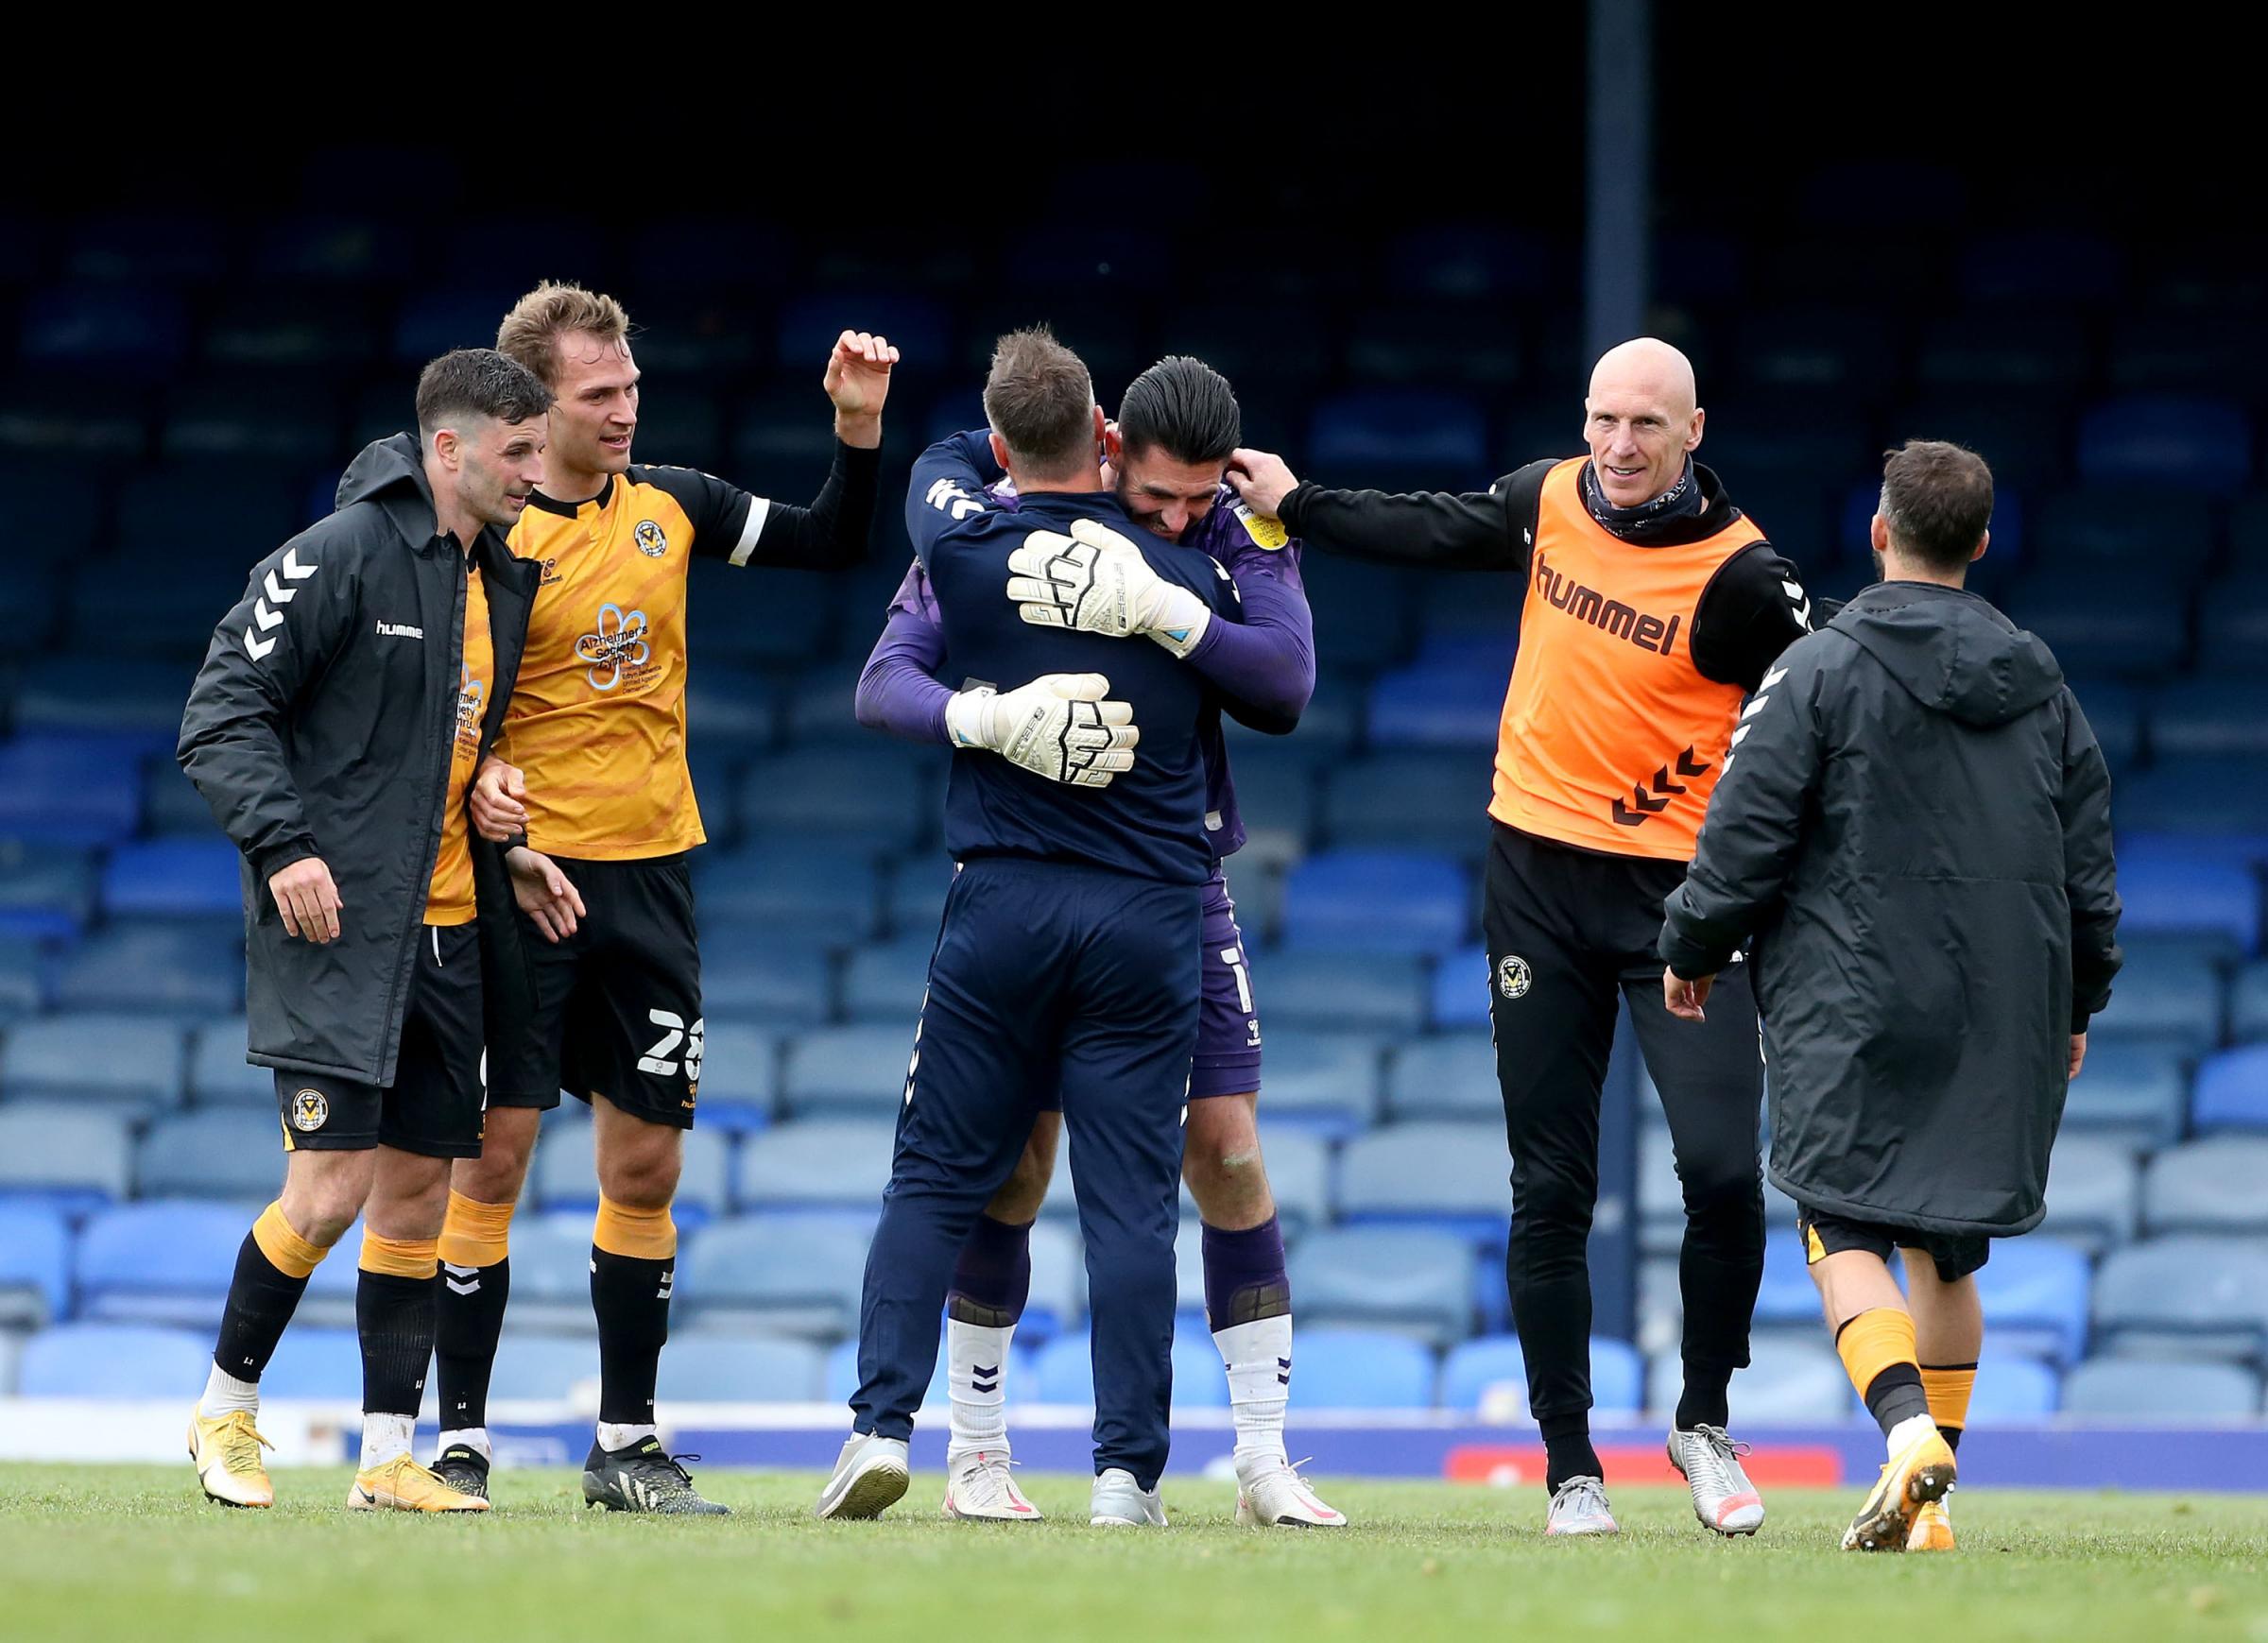 08.05.21 - Southend United v Newport County - Sky Bet League 2 - Newport County manager Michael Flynn and goalkeeper Tom King celebrate a 1-1 draw with Southend that means they are in the playoffs